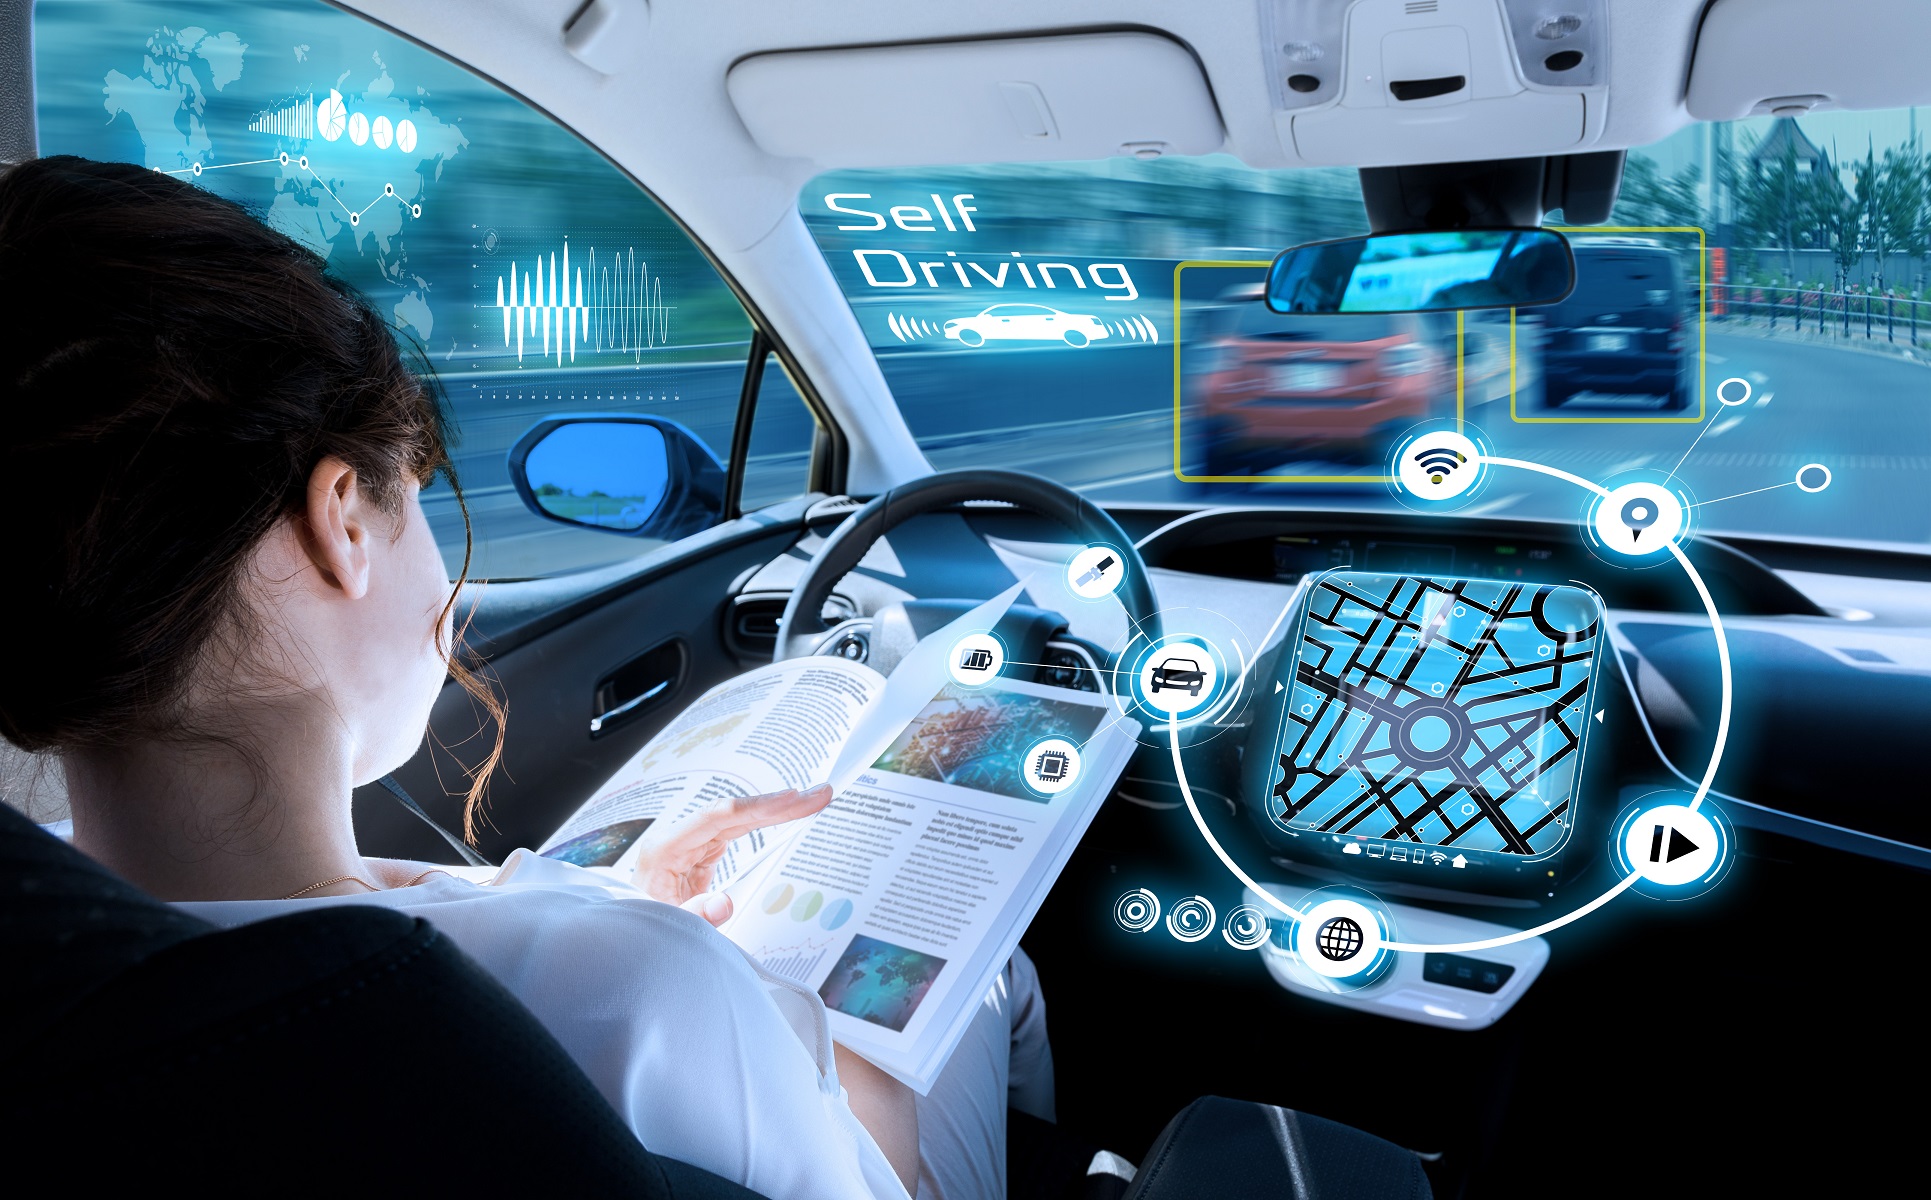 <p>While there are several cars on the market that have self-driving features, the world has yet to see a fully autonomous vehicle.</p>  <p> According to SAE International, one of the world’s leading organizations of automotive engineers, there are <strong>six different levels of autonomous driving</strong>, and only the final level is truly self-driving.</p>